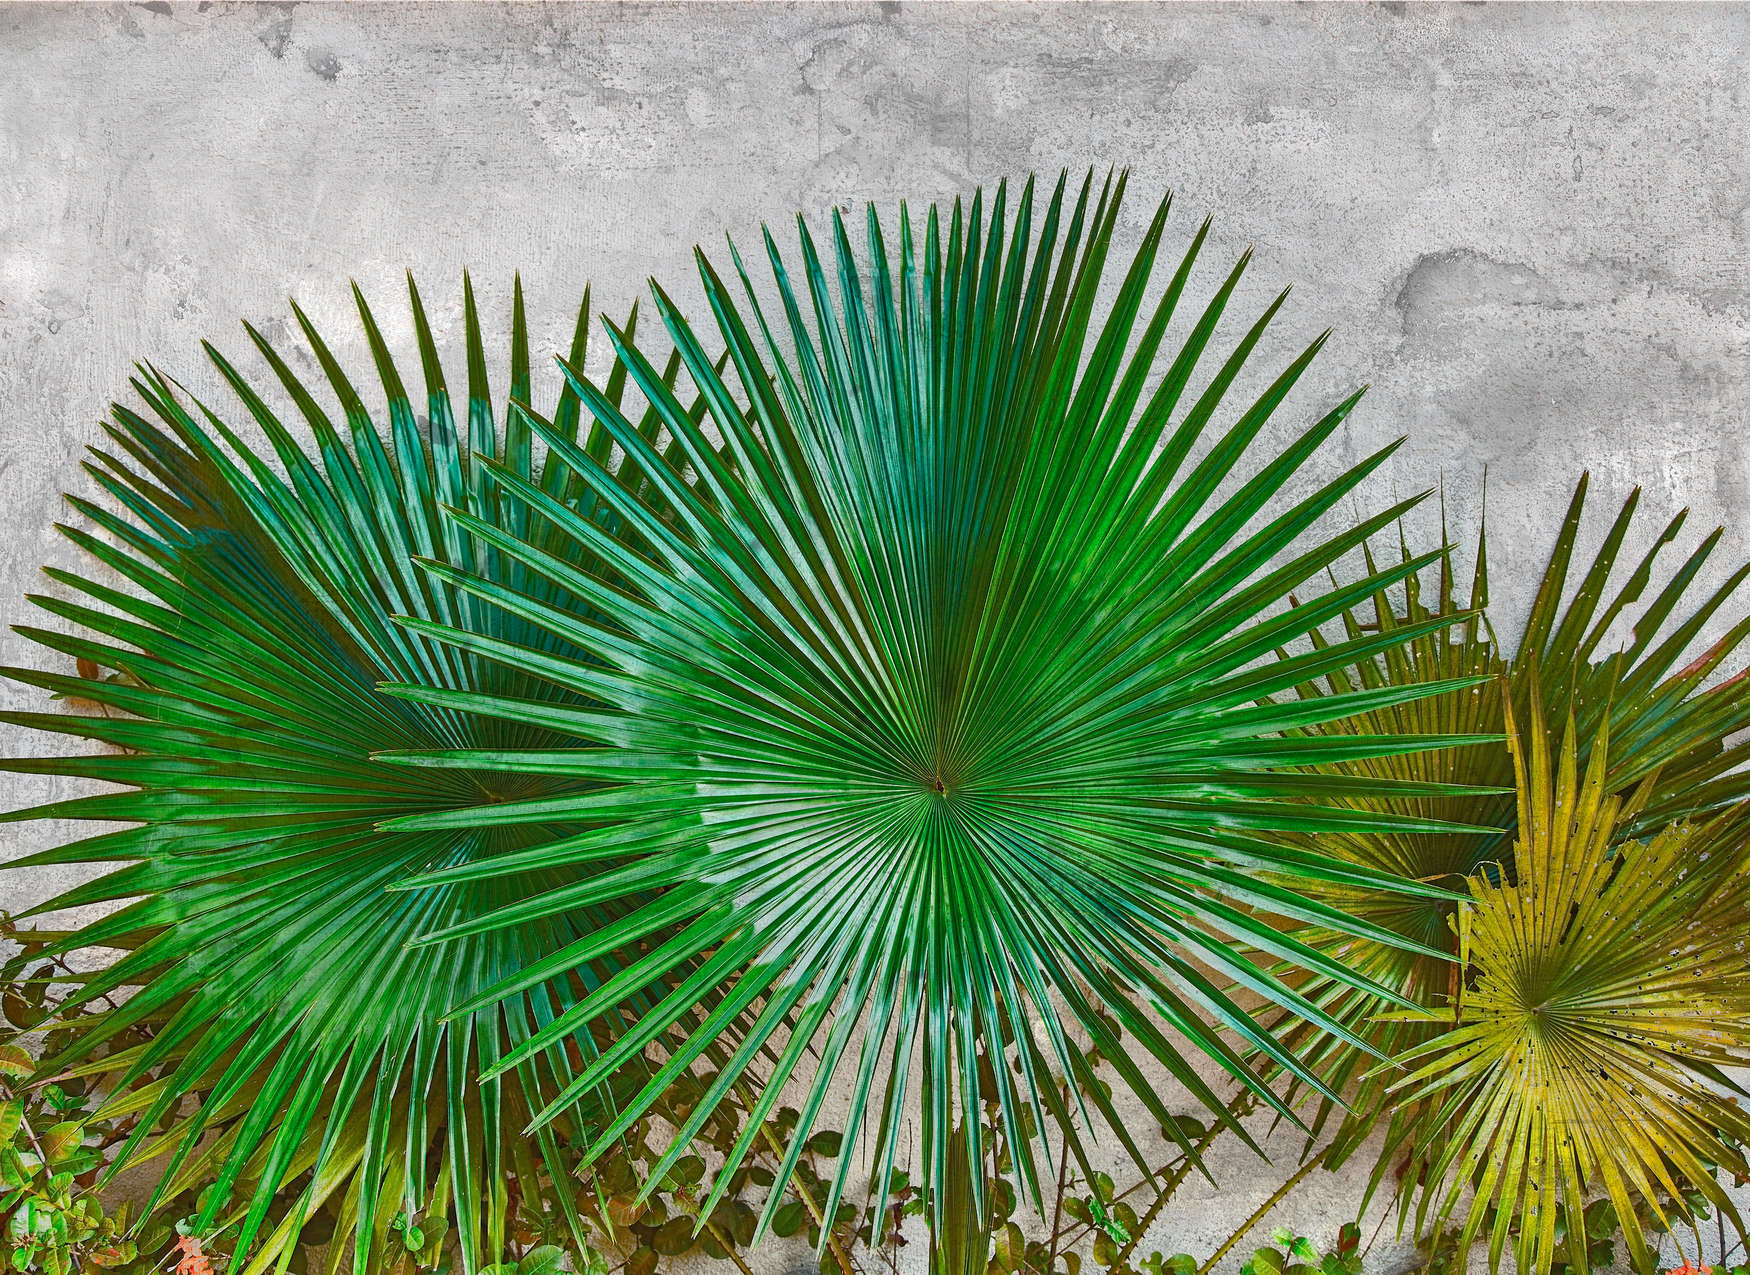             Photo wallpaper agave leaves in front of concrete wall - green, grey
        